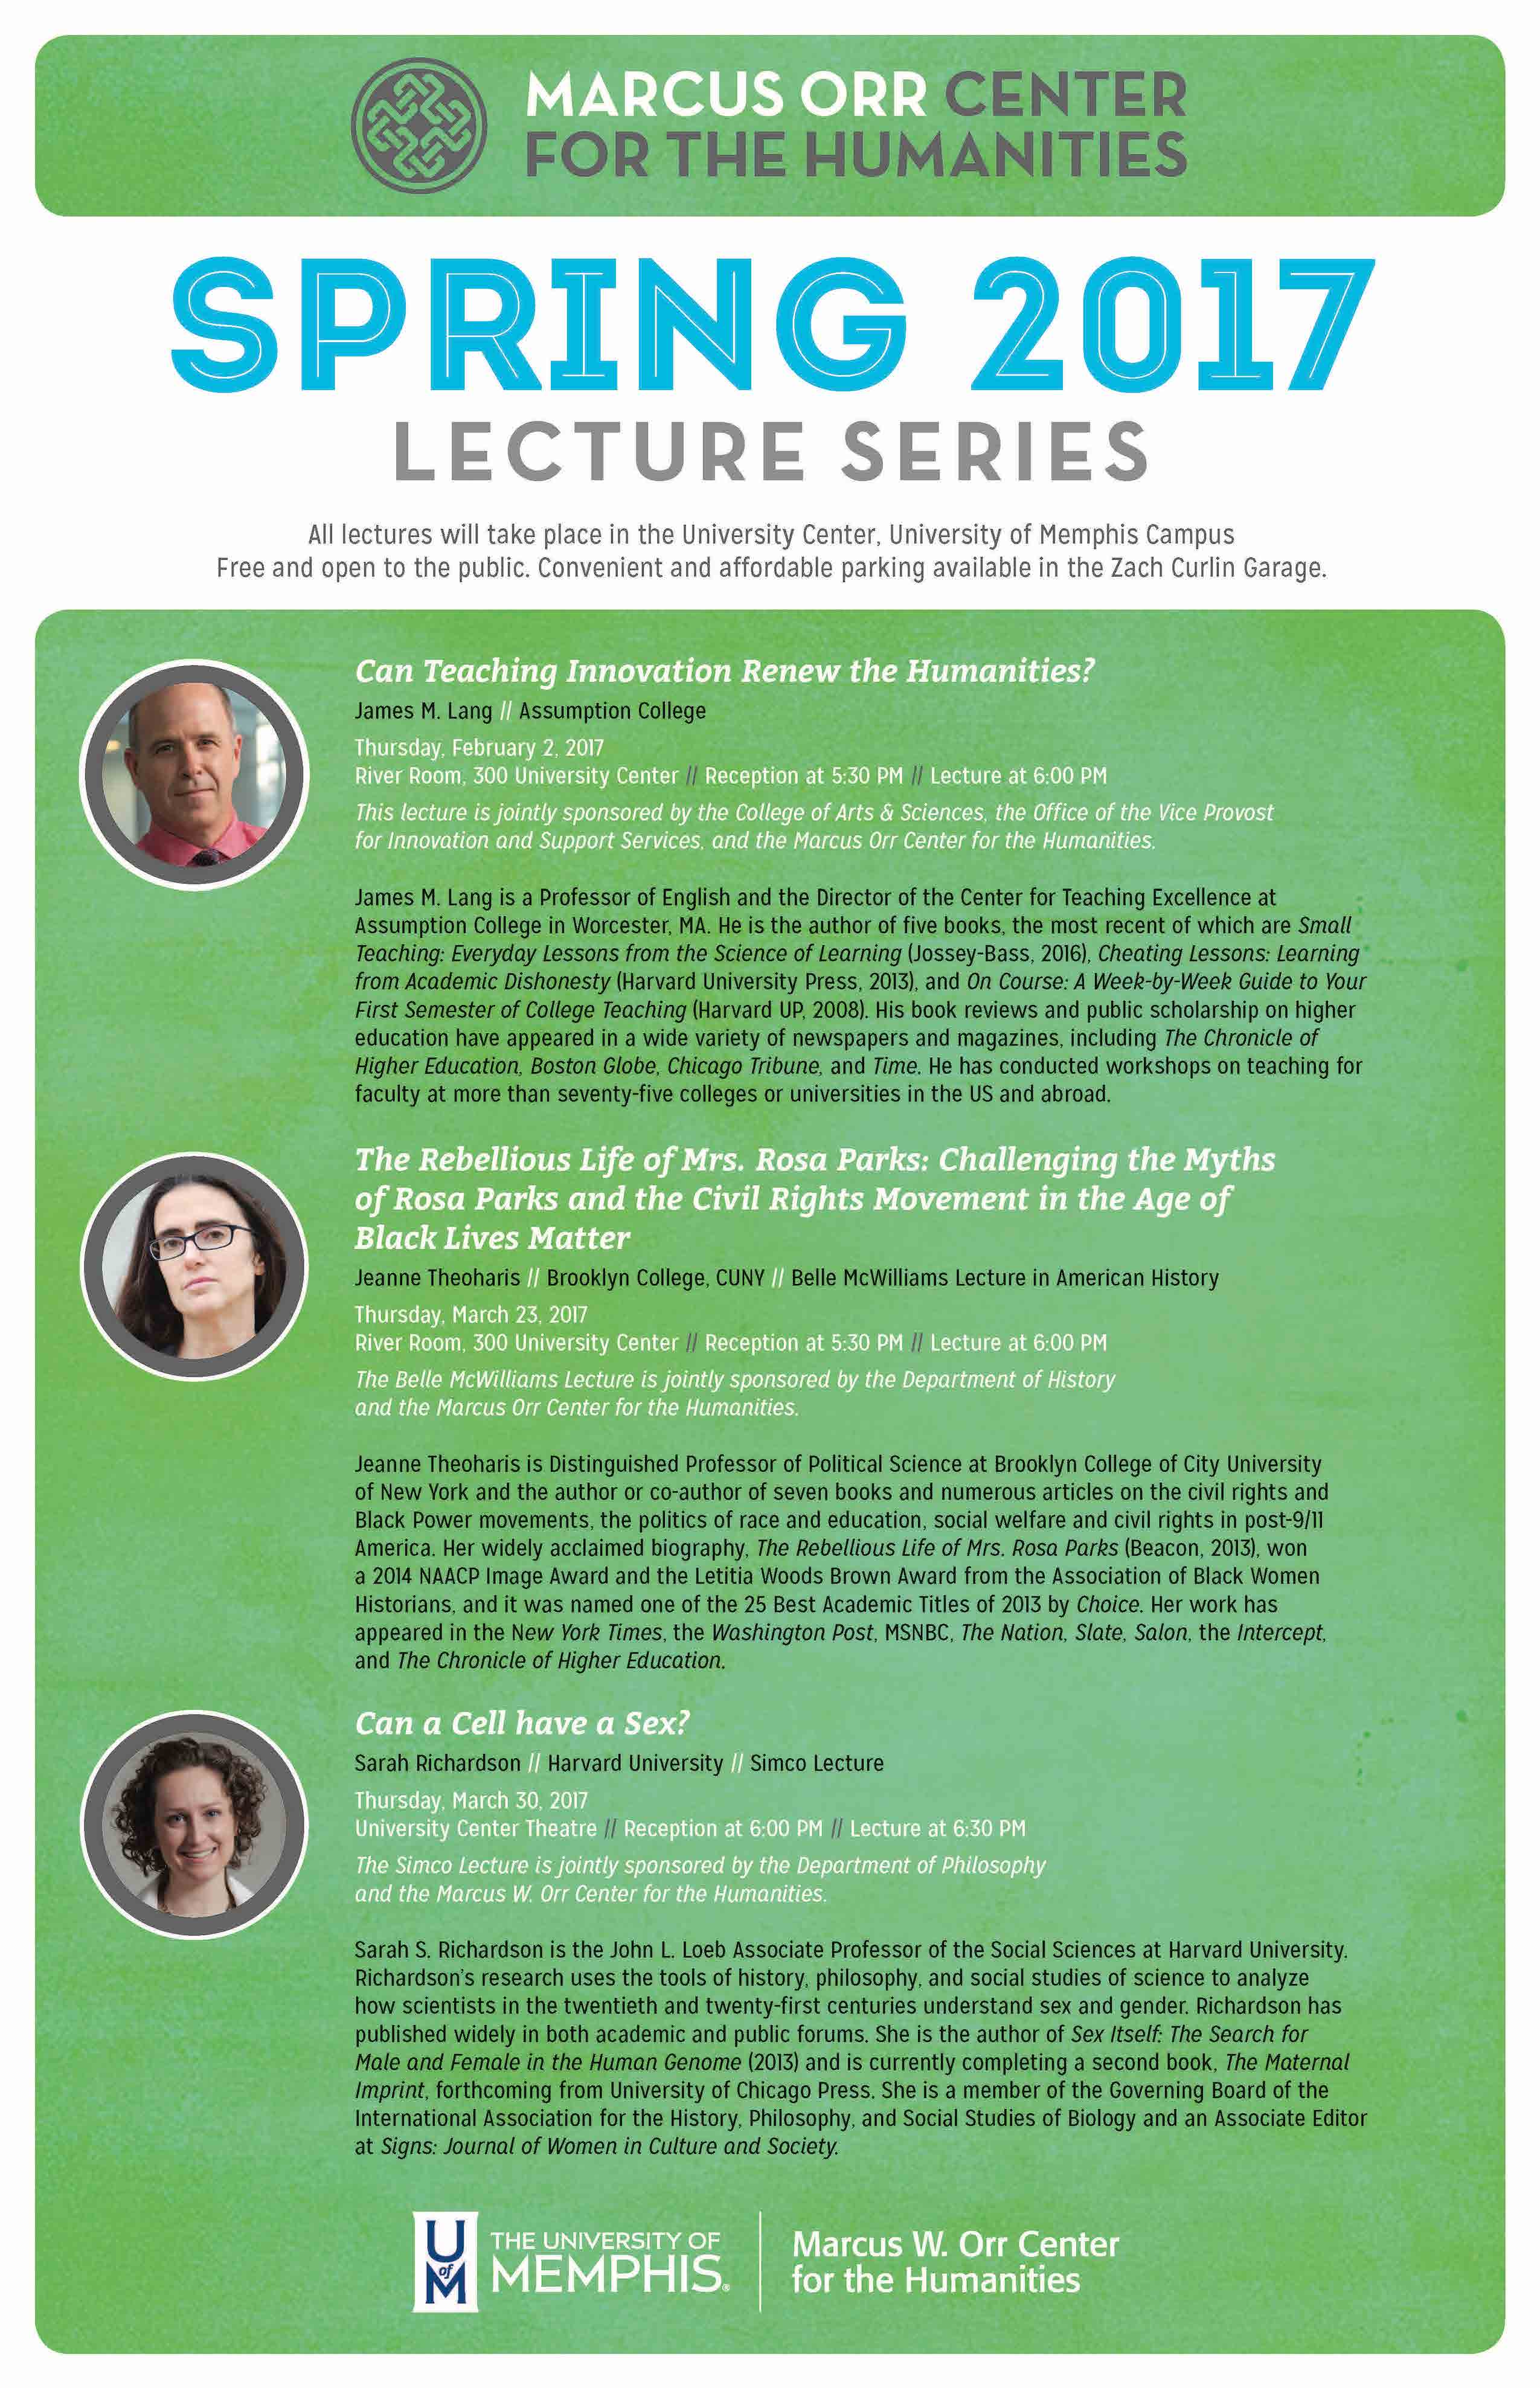 Marcus W. Orr Center for the Humanities Lecture Series